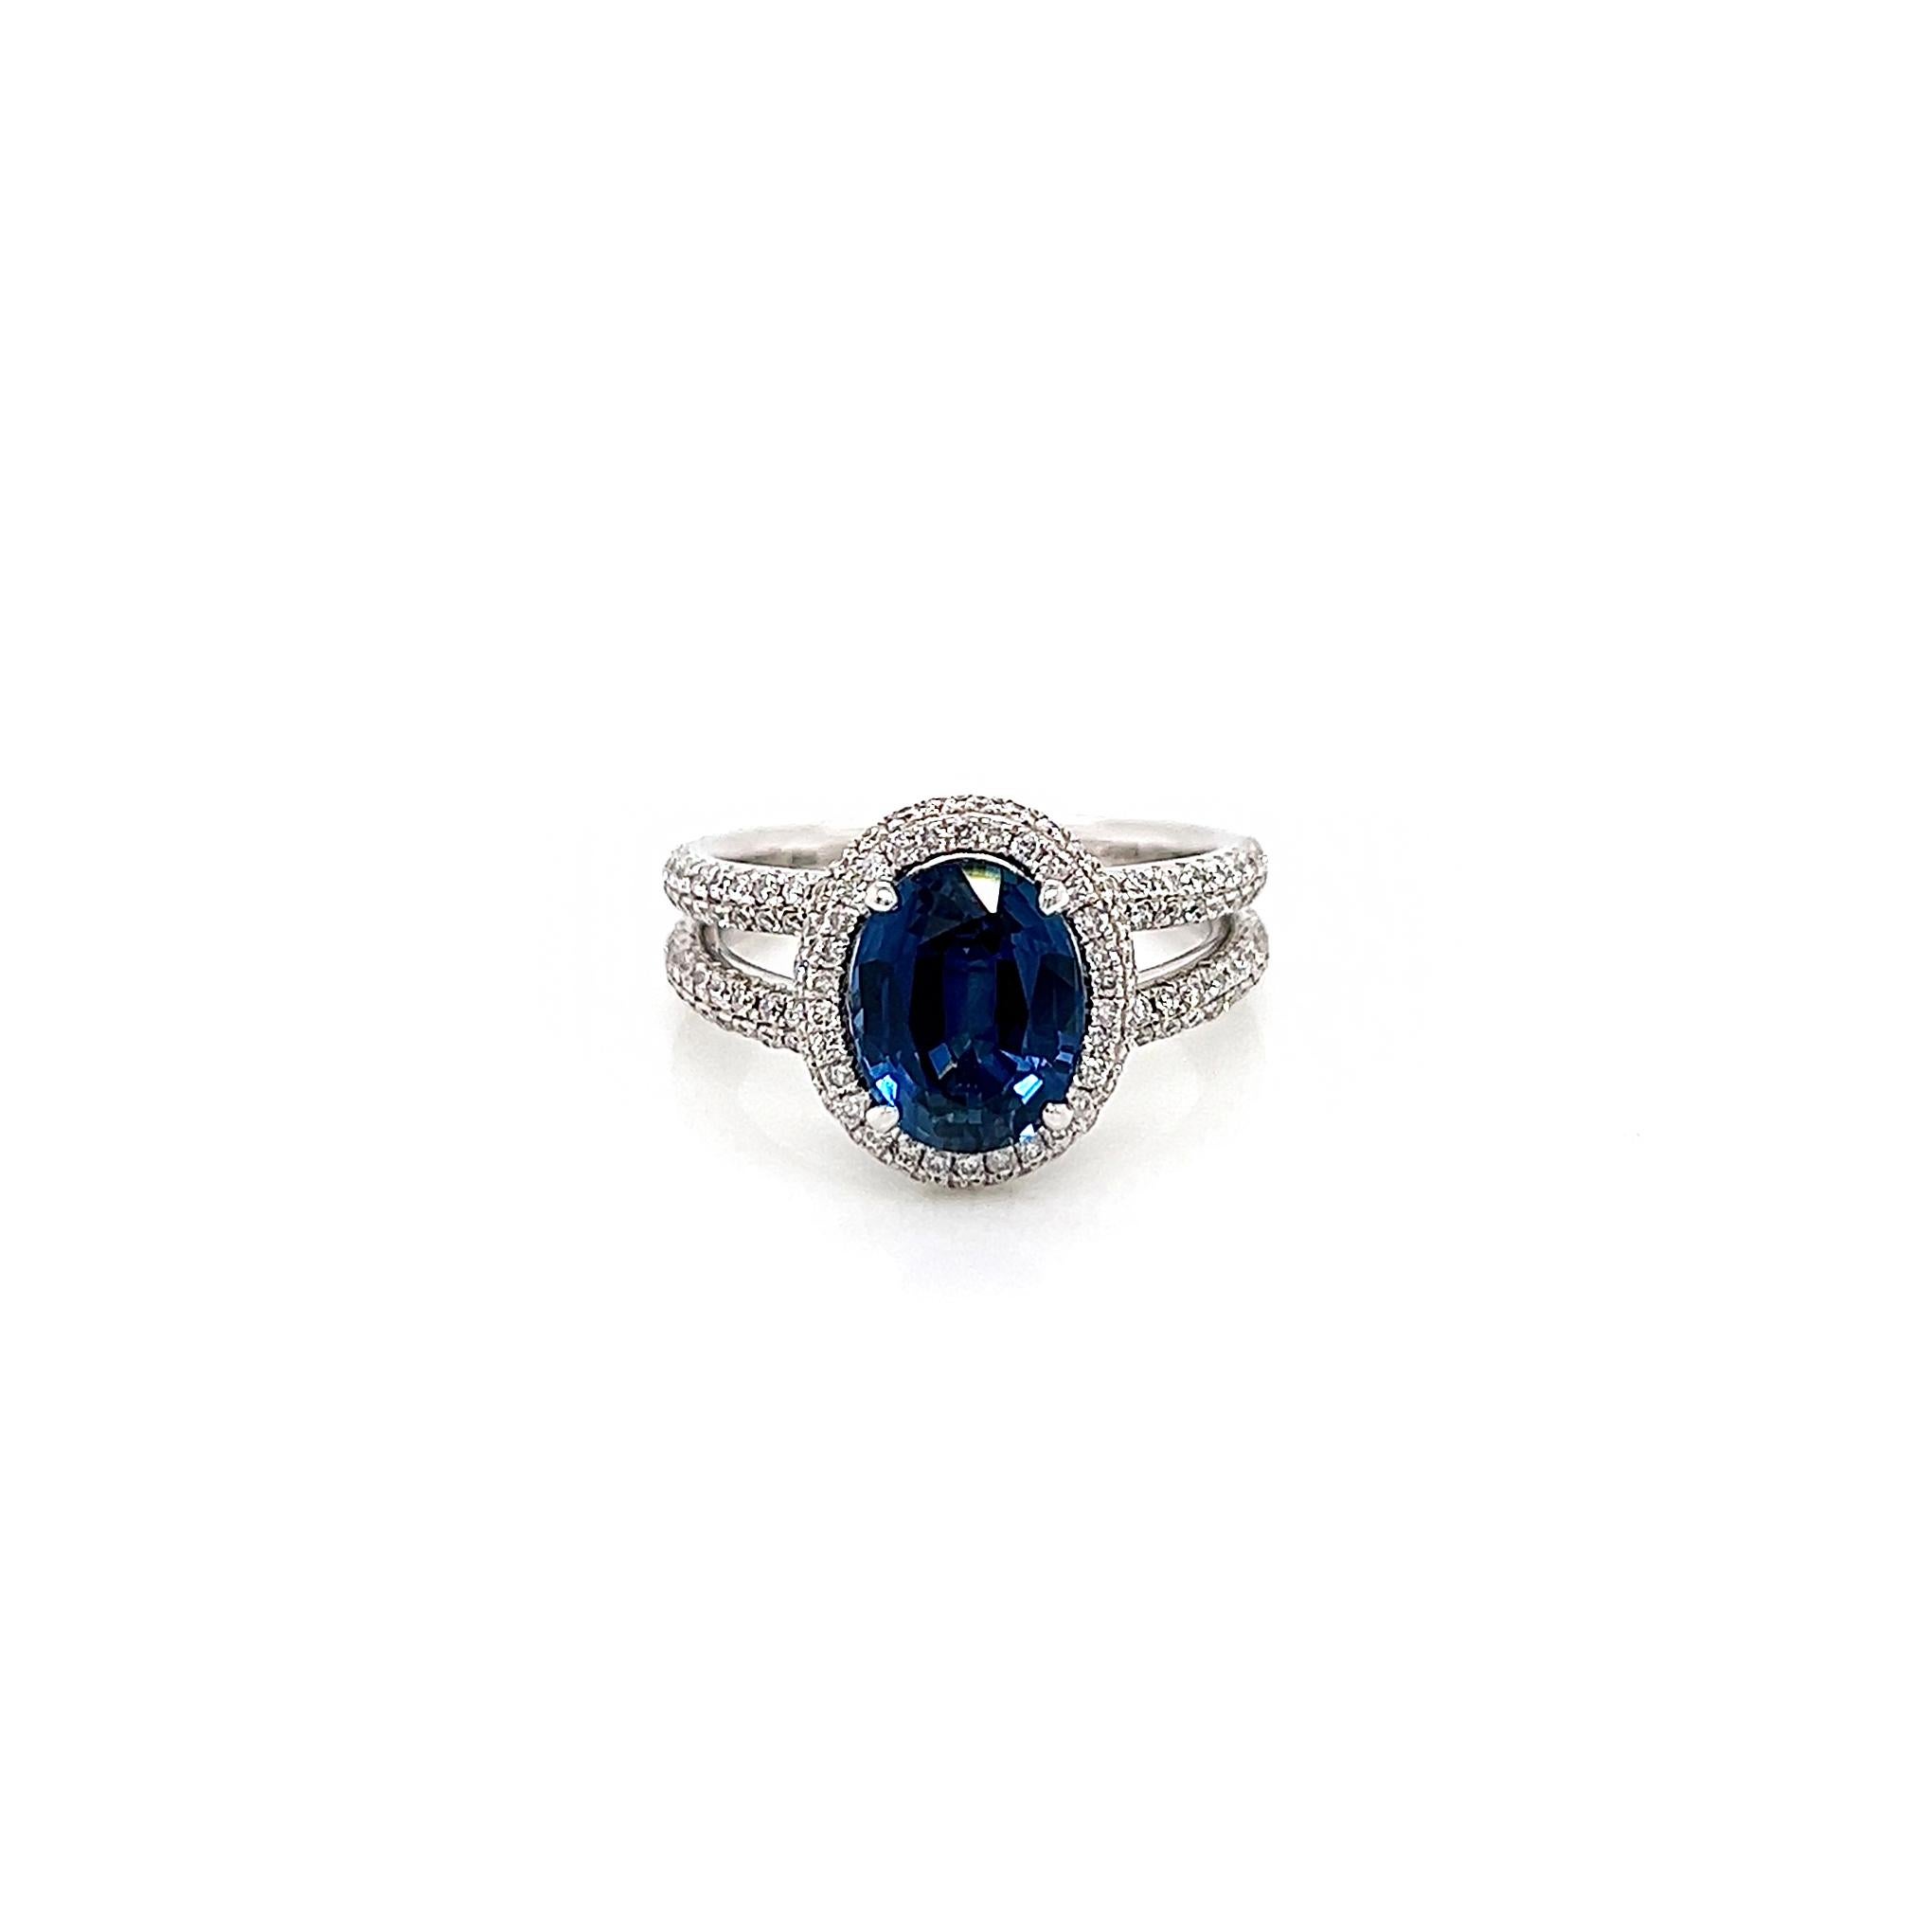 4.0 Total Carat Sapphire and Diamond Halo Pave-Set Ladies Ring

-Metal Type: 18K White Gold, Split Shank 
-2.95 Carat Oval Cut Natural Blue Sapphire 
-1.05 Carat Round Natural Diamonds. F-G Color, VS-SI Clarity 
-Size 6.25
